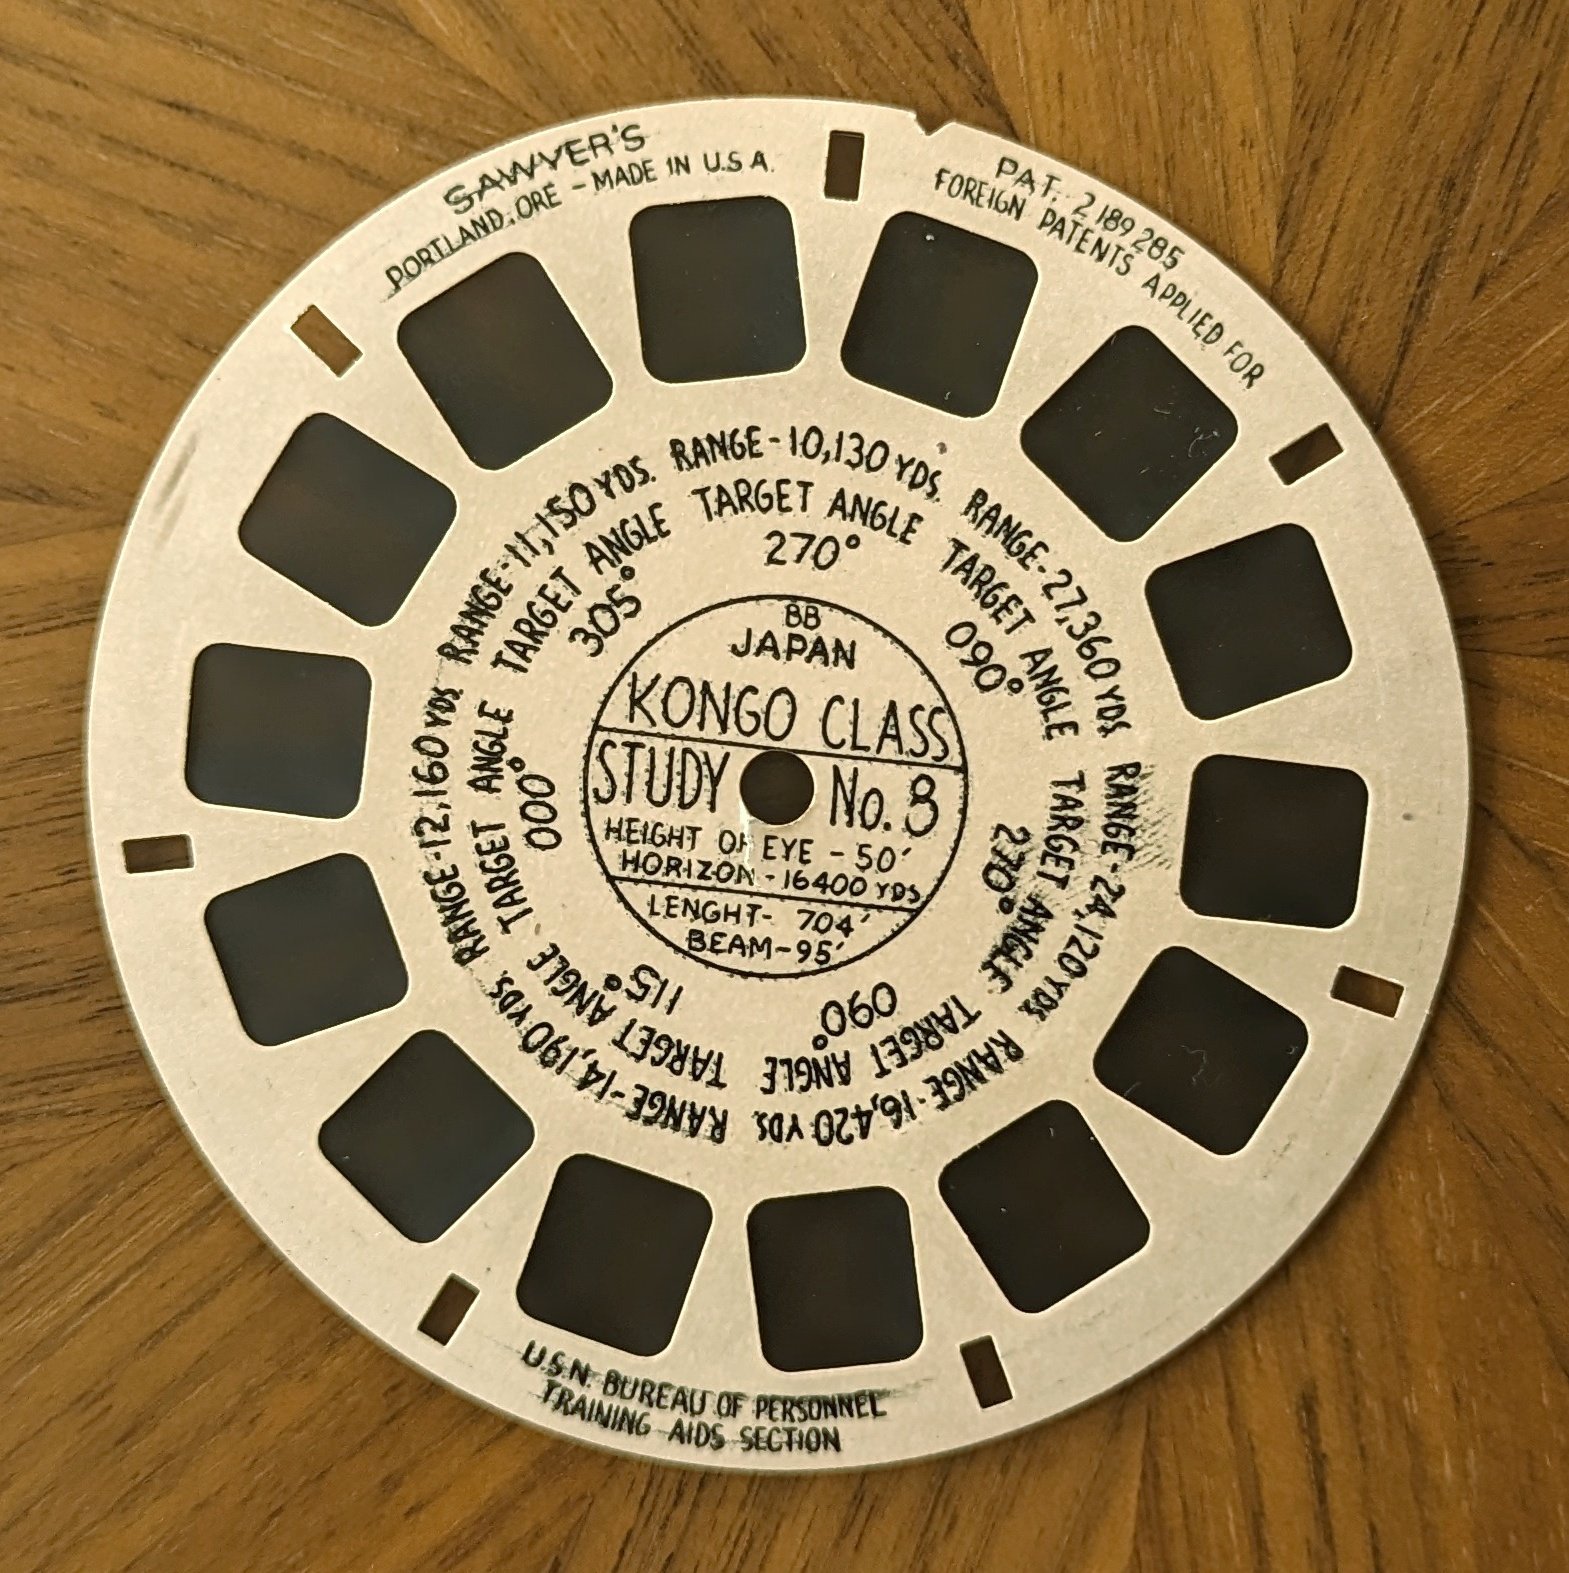 Sawyer's View-Master Model B Clamshell